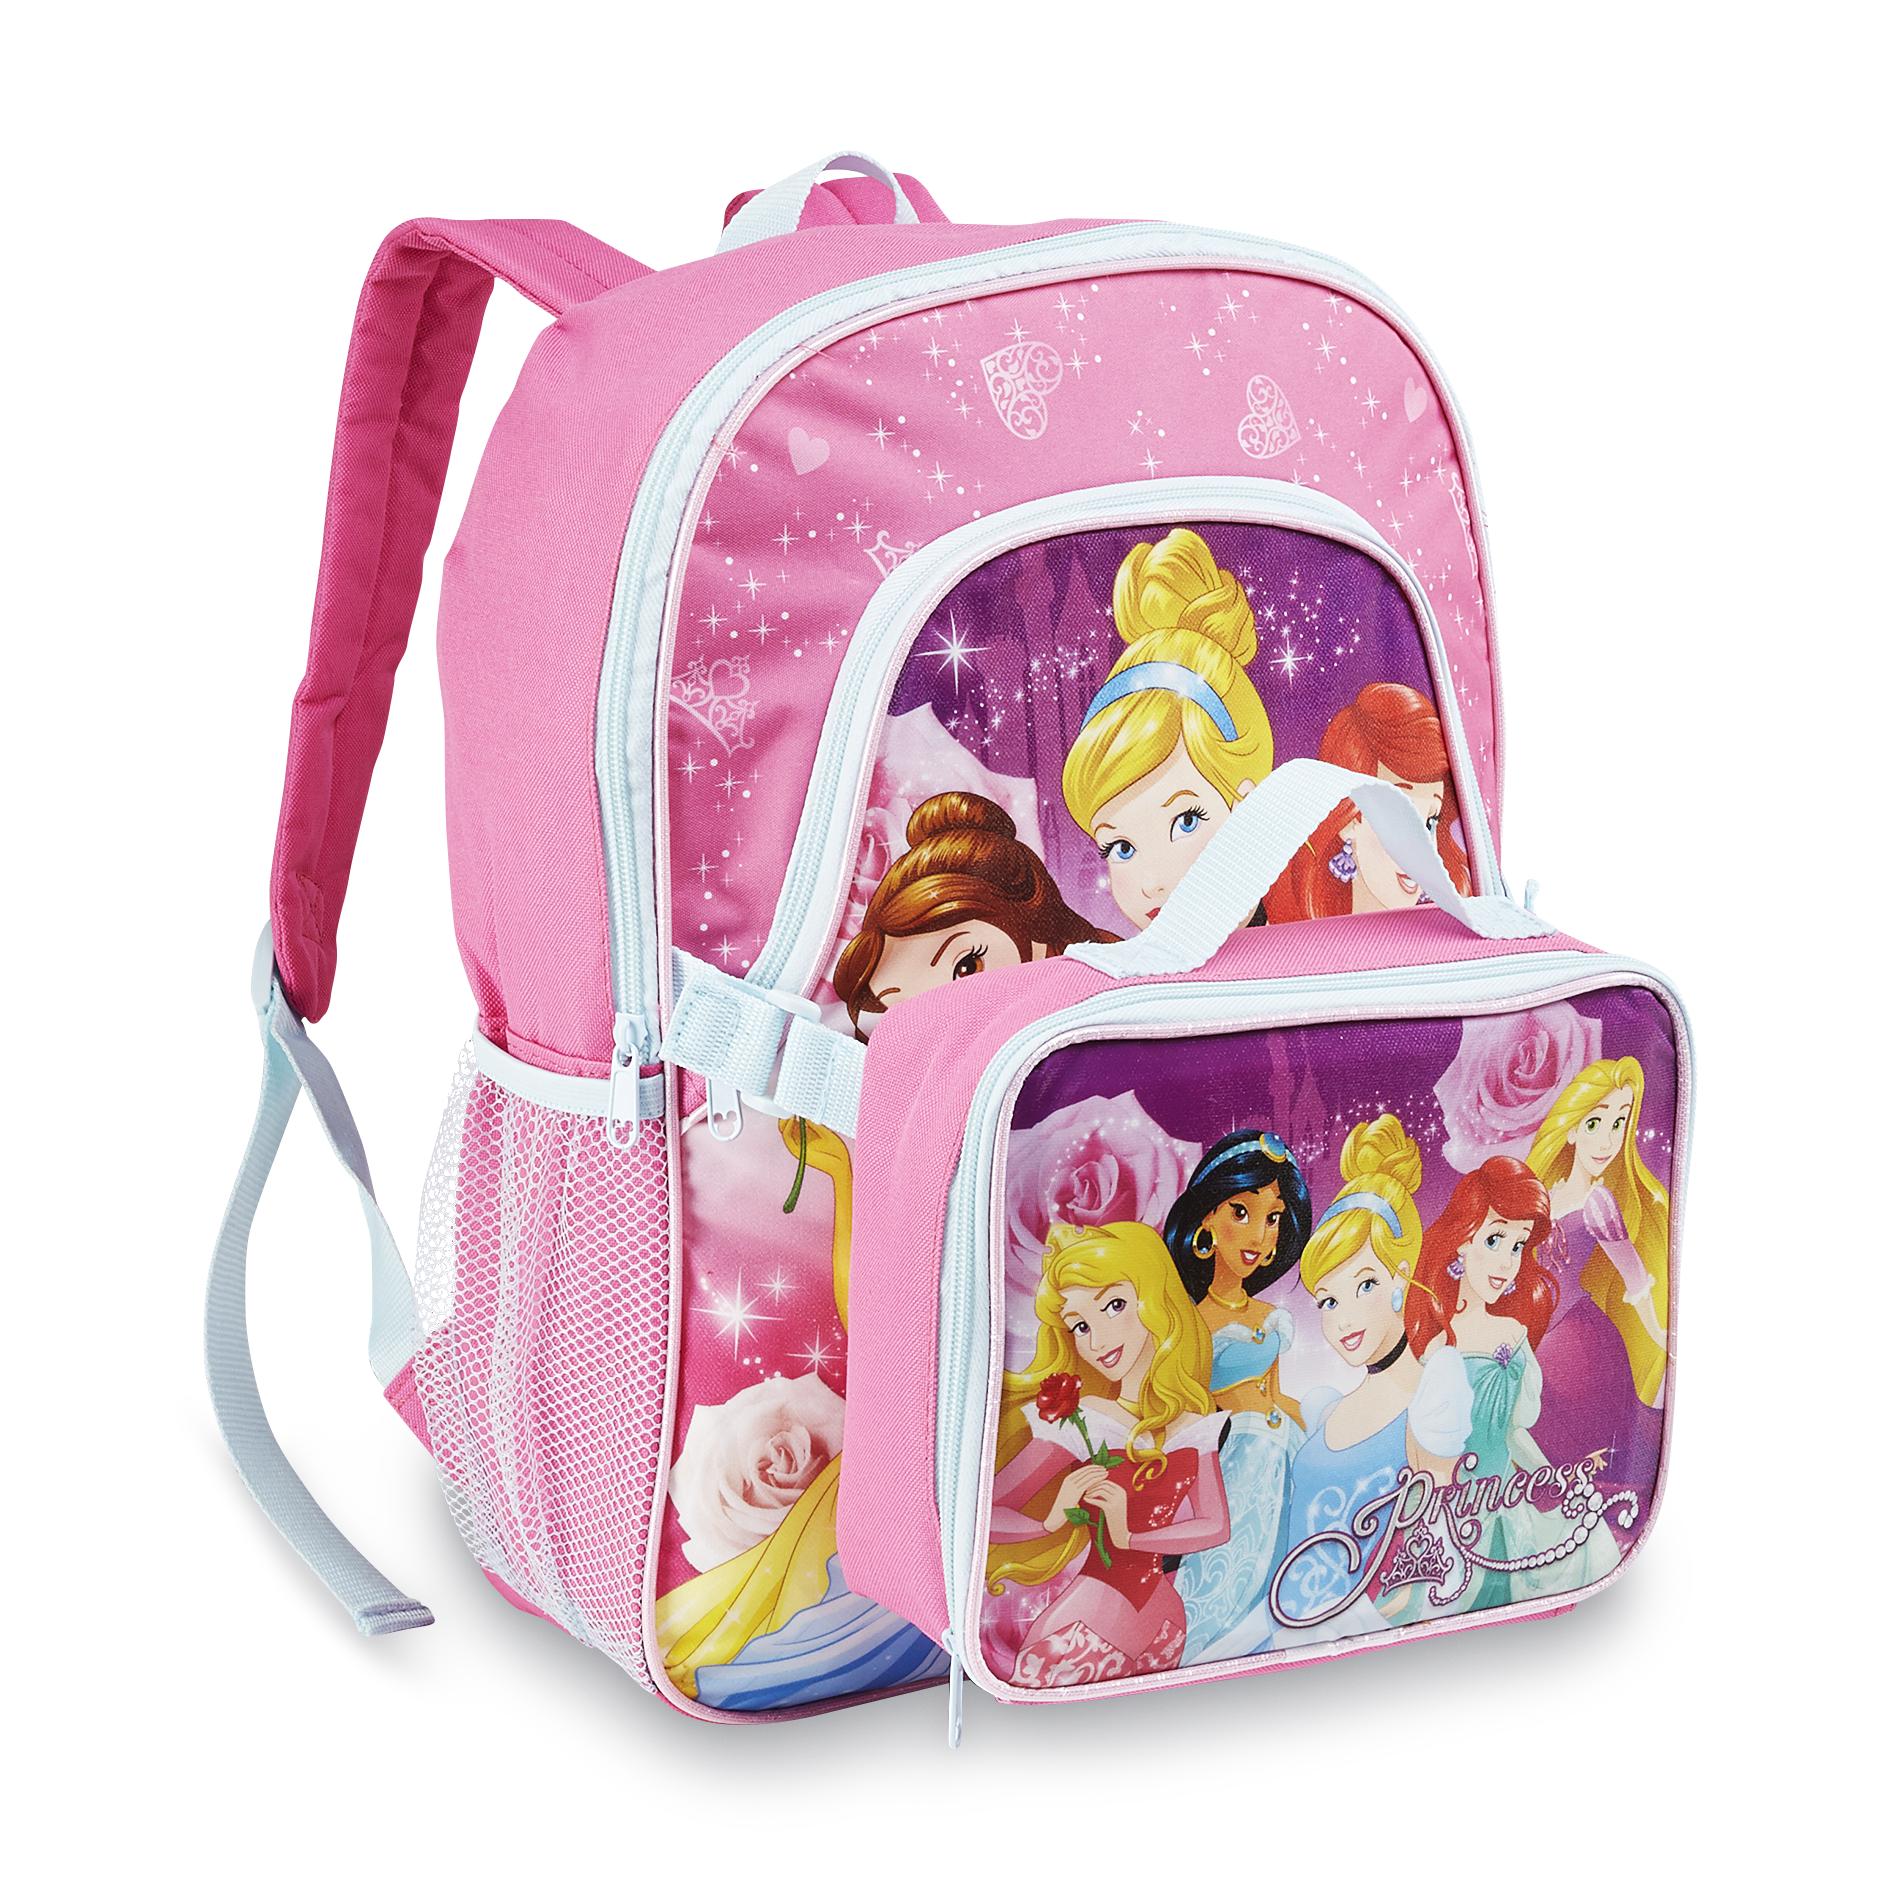 Disney Princess Girl's Backpack & Lunch Bag - Home - Luggage & Travel ...